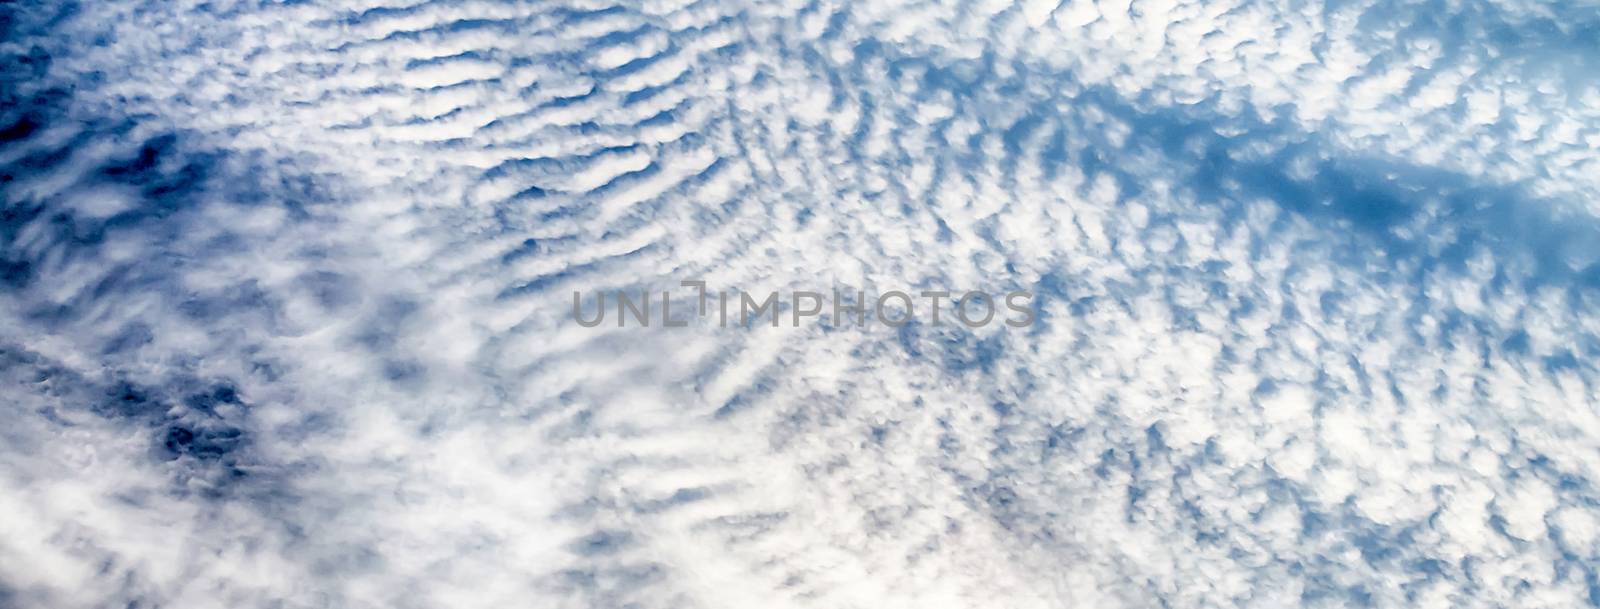 Blue Sky with Stripes Clouds Texture, may use as background by marcorubino